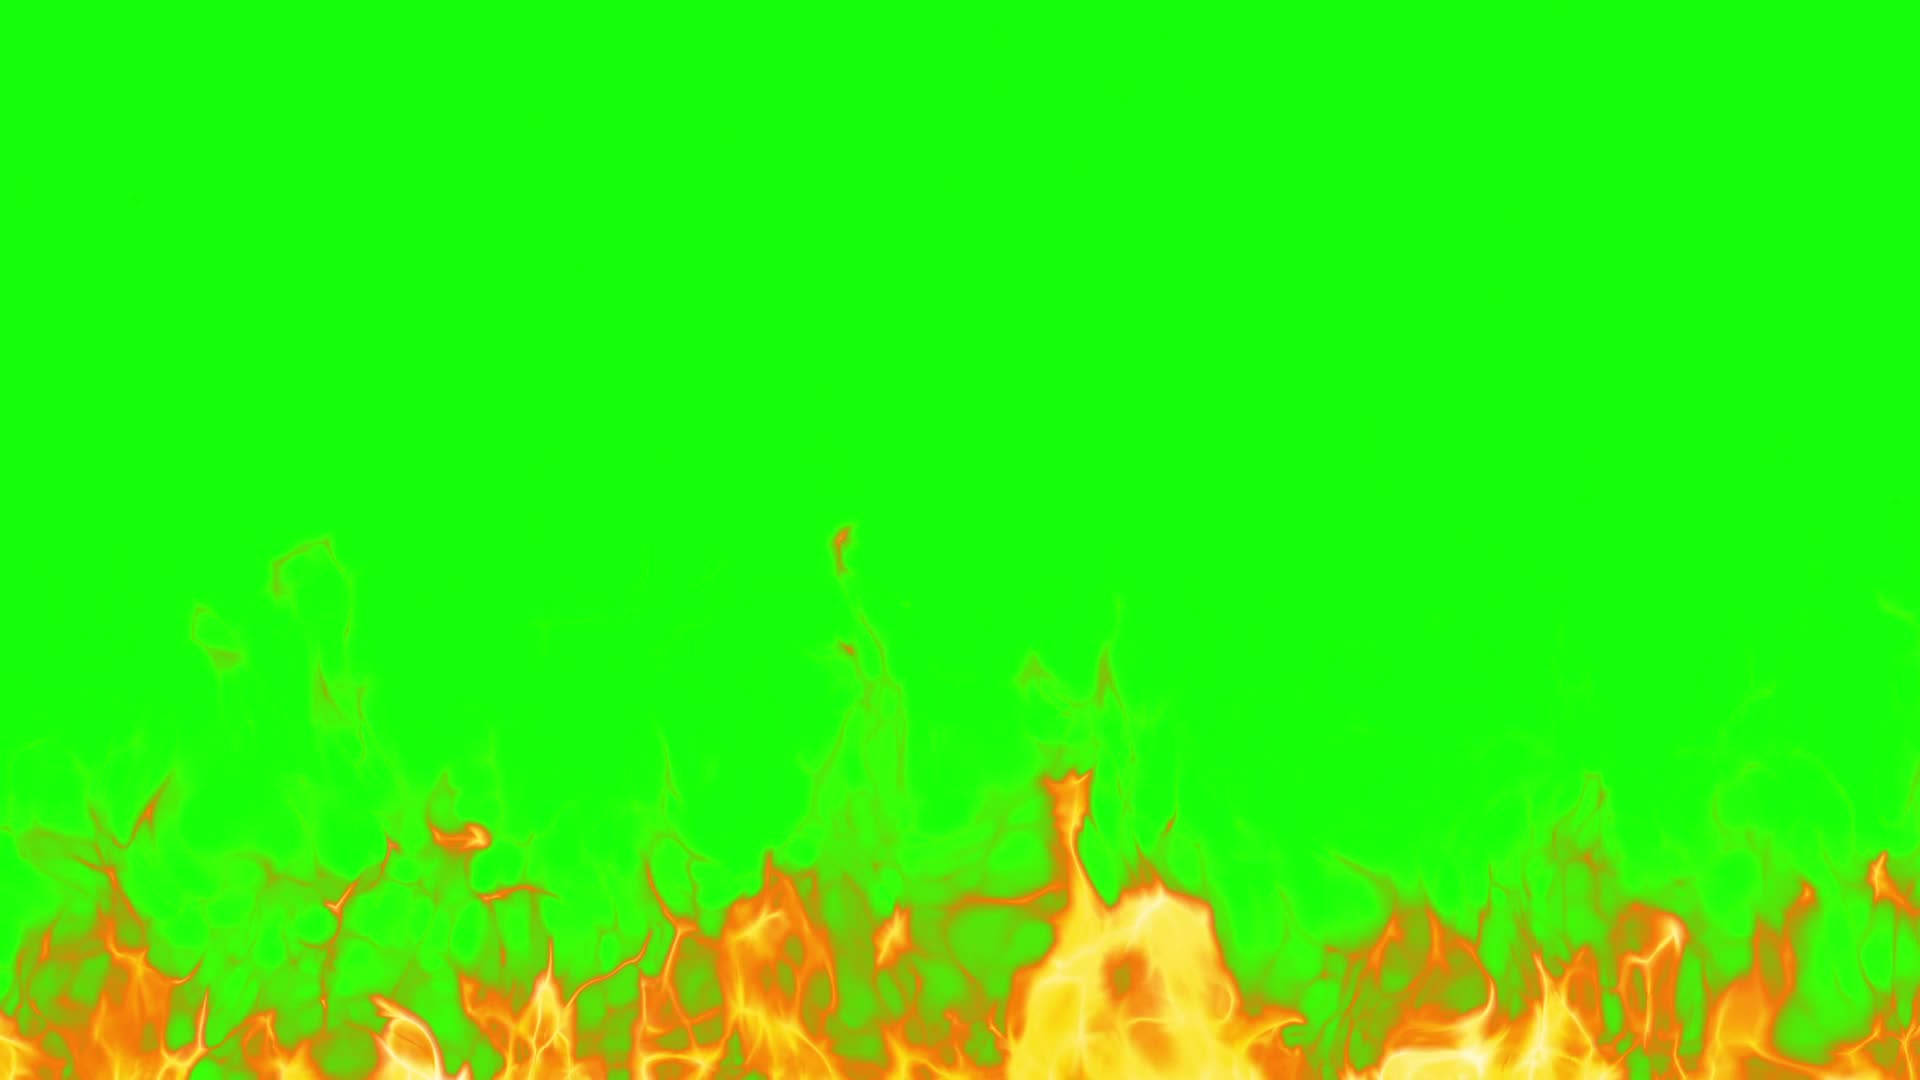 Green Screen With Flames Wallpaper